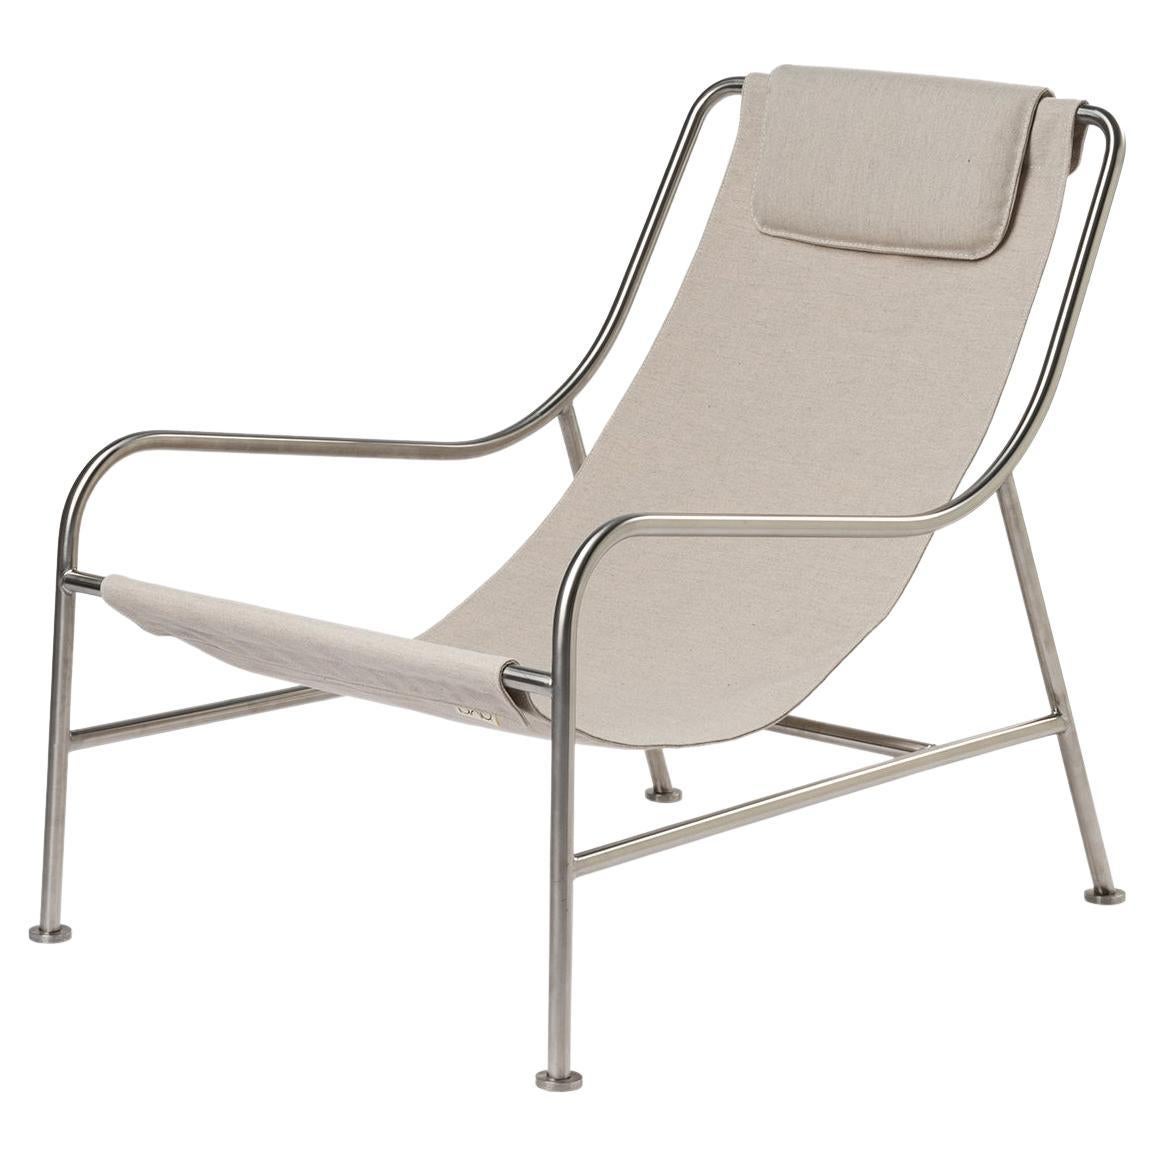 Minimalist Outdoor Lounge Chair in "Papyrus" Fabric and Brushed Stainless Steel For Sale